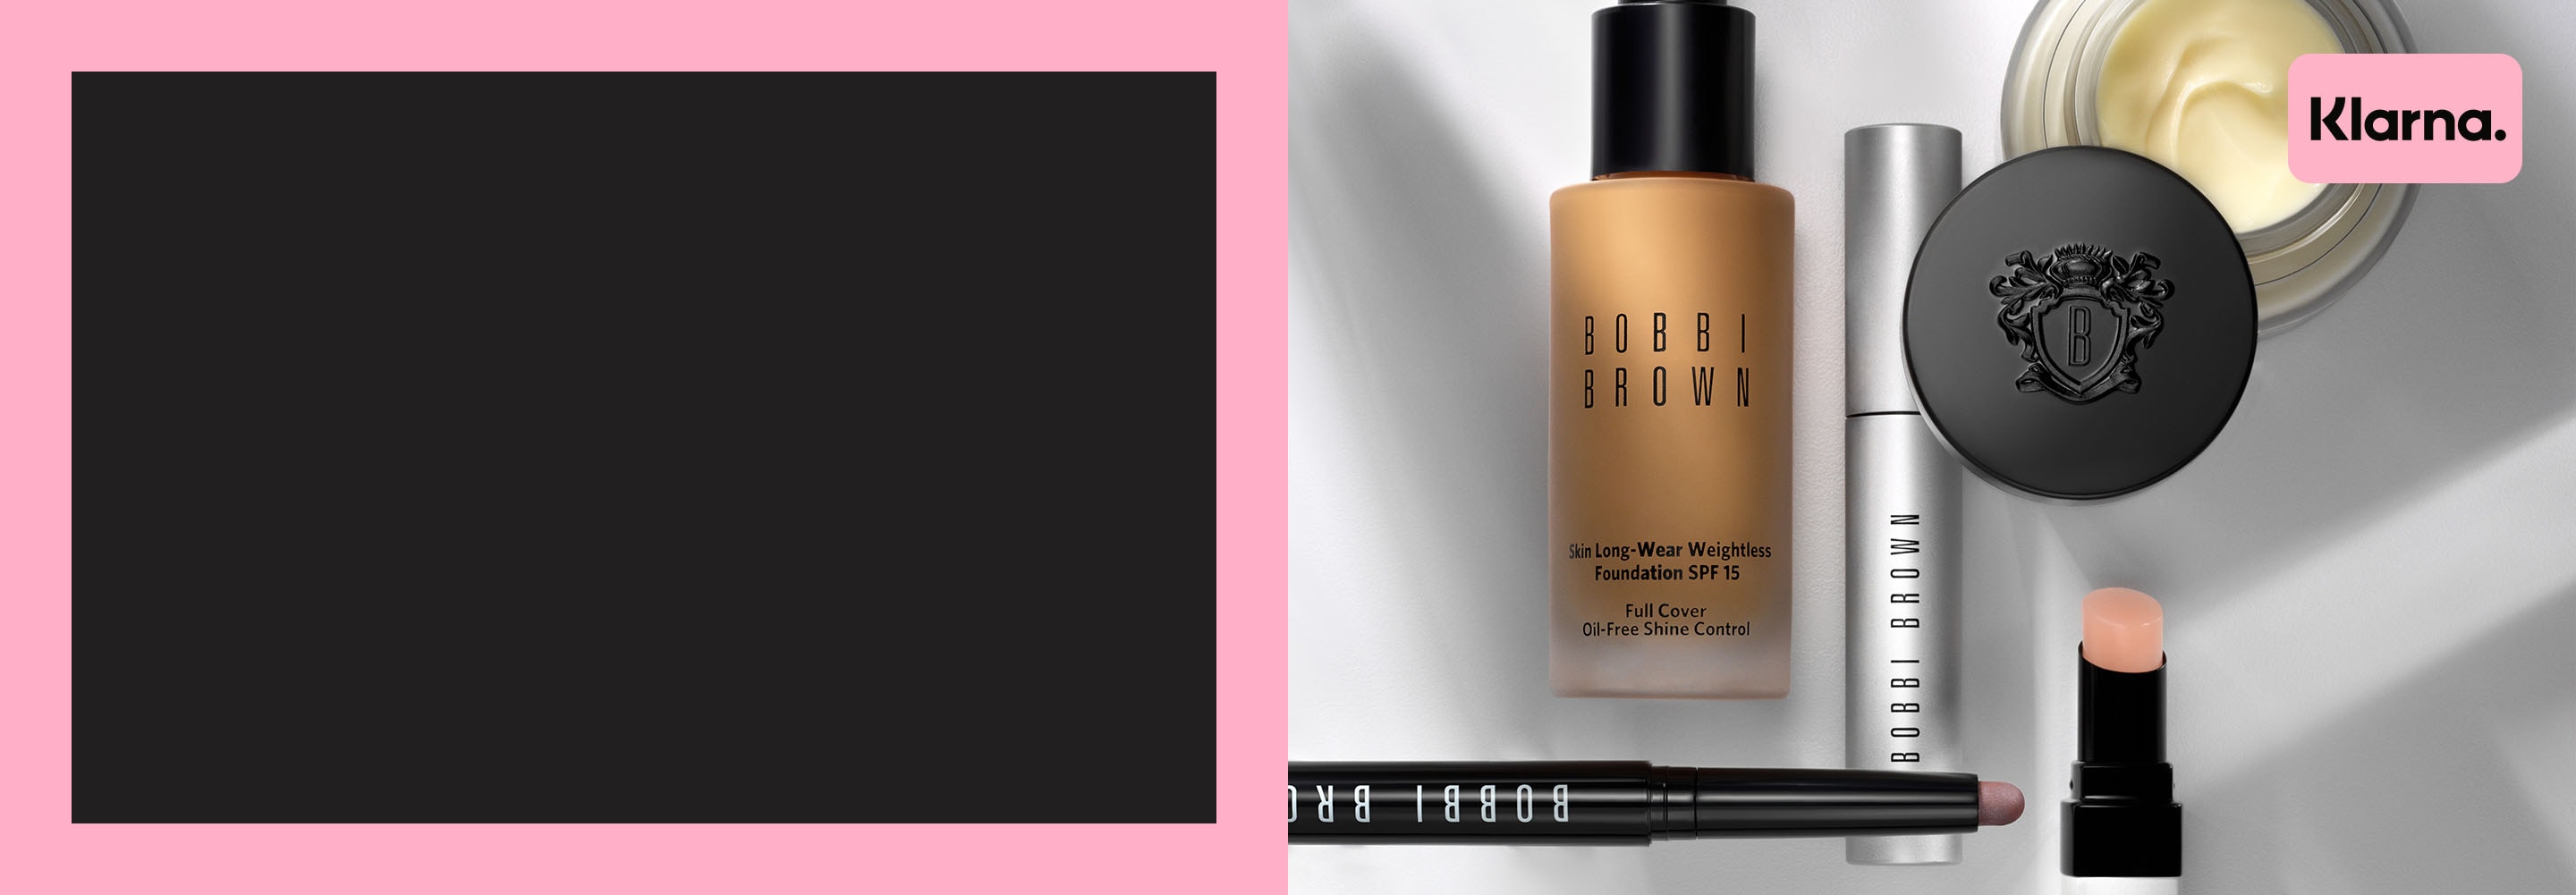 Selection of bestselling Bobbi Brown products over a grey background